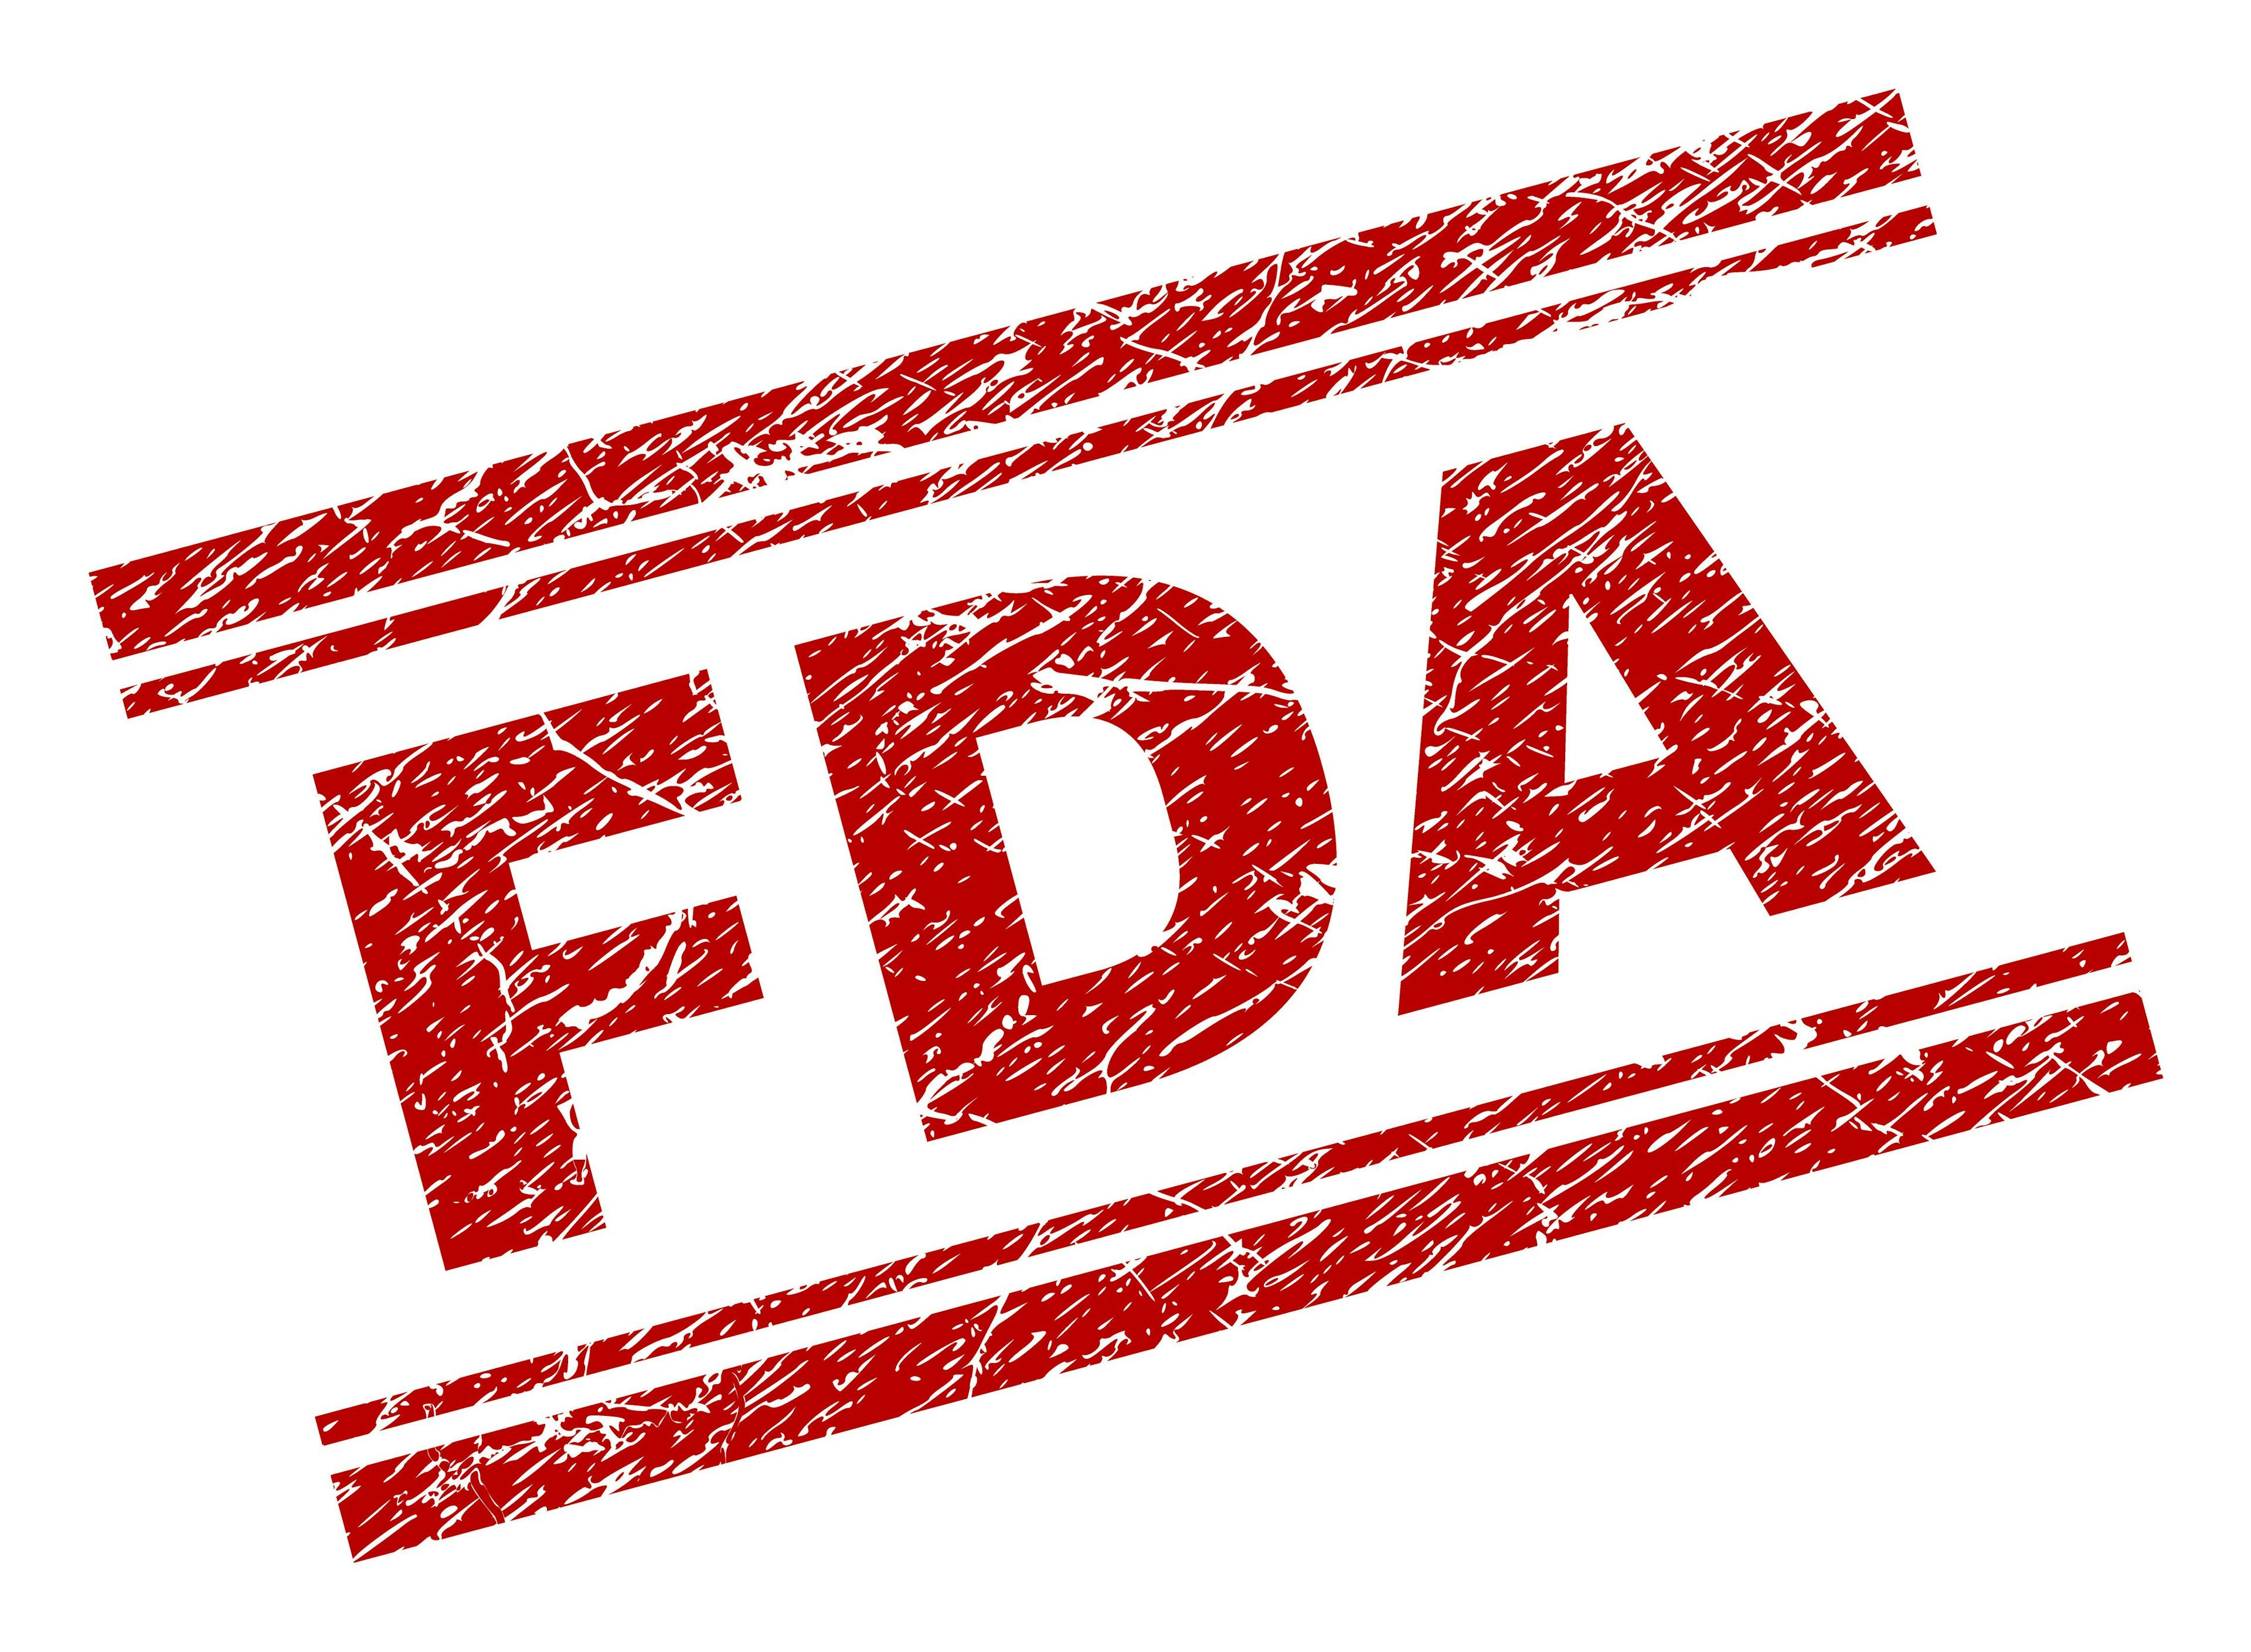 FDA Accepts BLA Resubmission for DAXI Injections